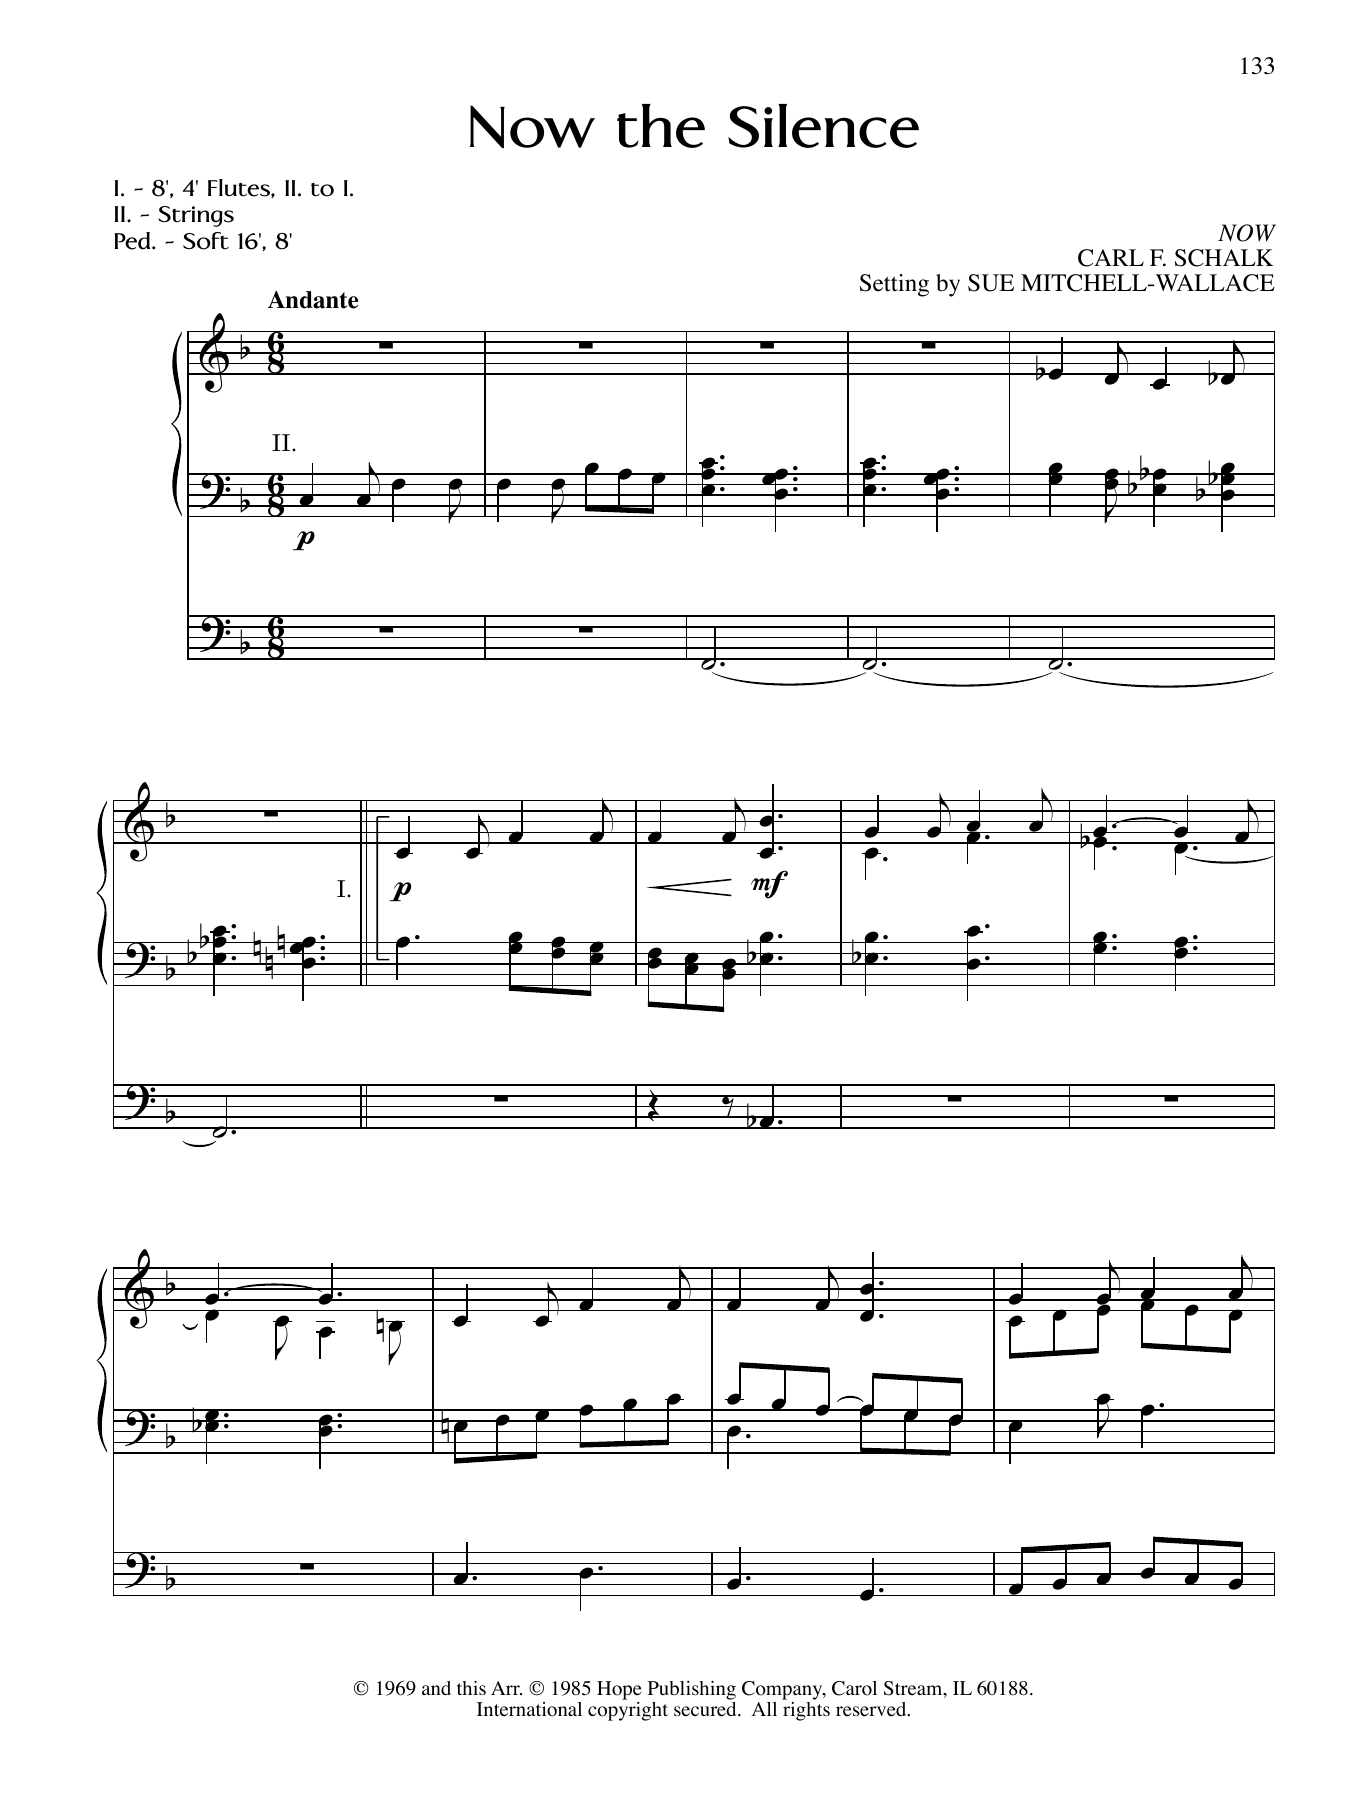 Download Sue Mitchell-Wallace Now the Silence Sheet Music